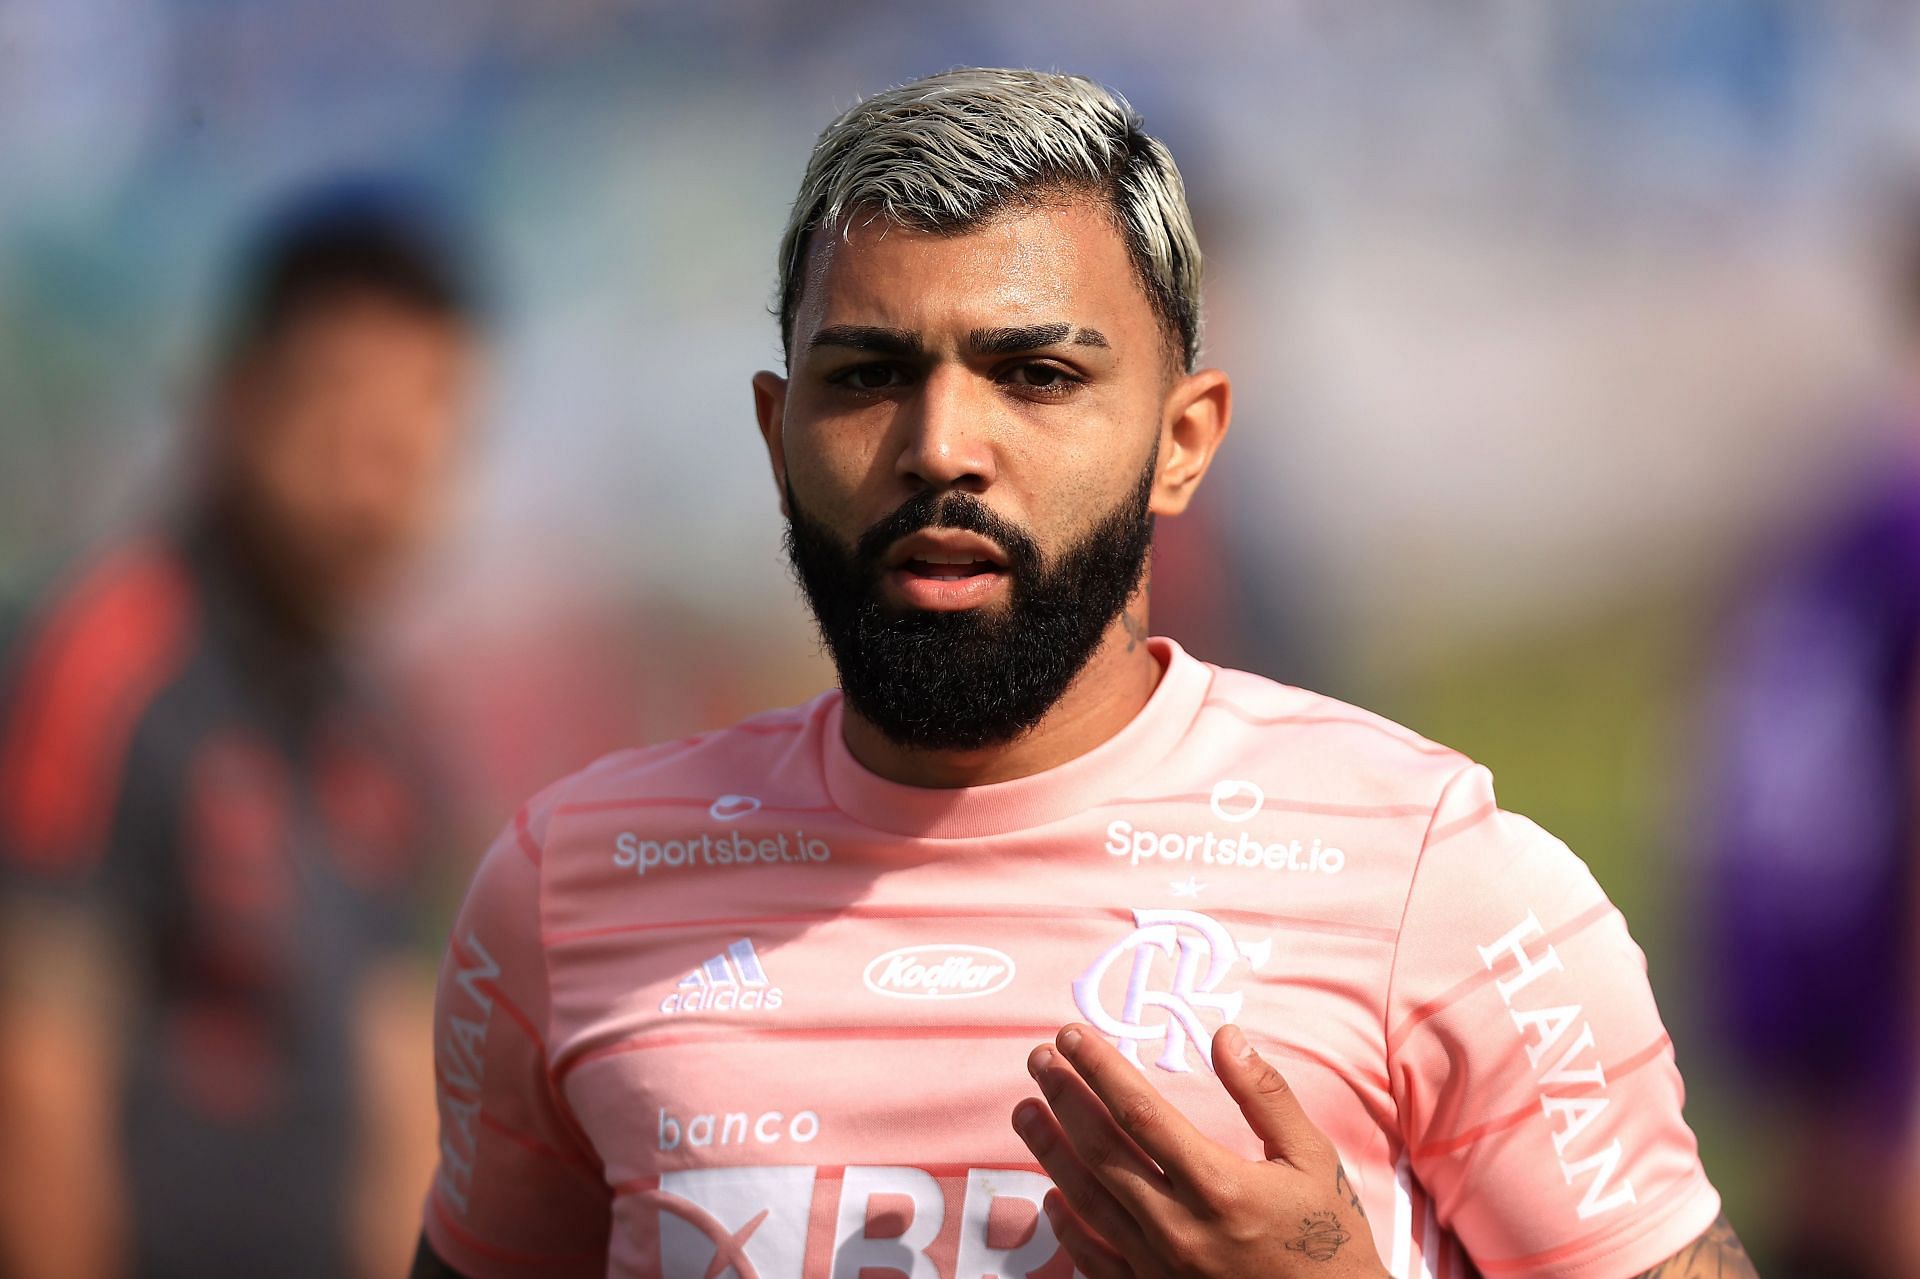 Arsenal are locked in battle with Newcastle United and West Ham United for Gabigol.